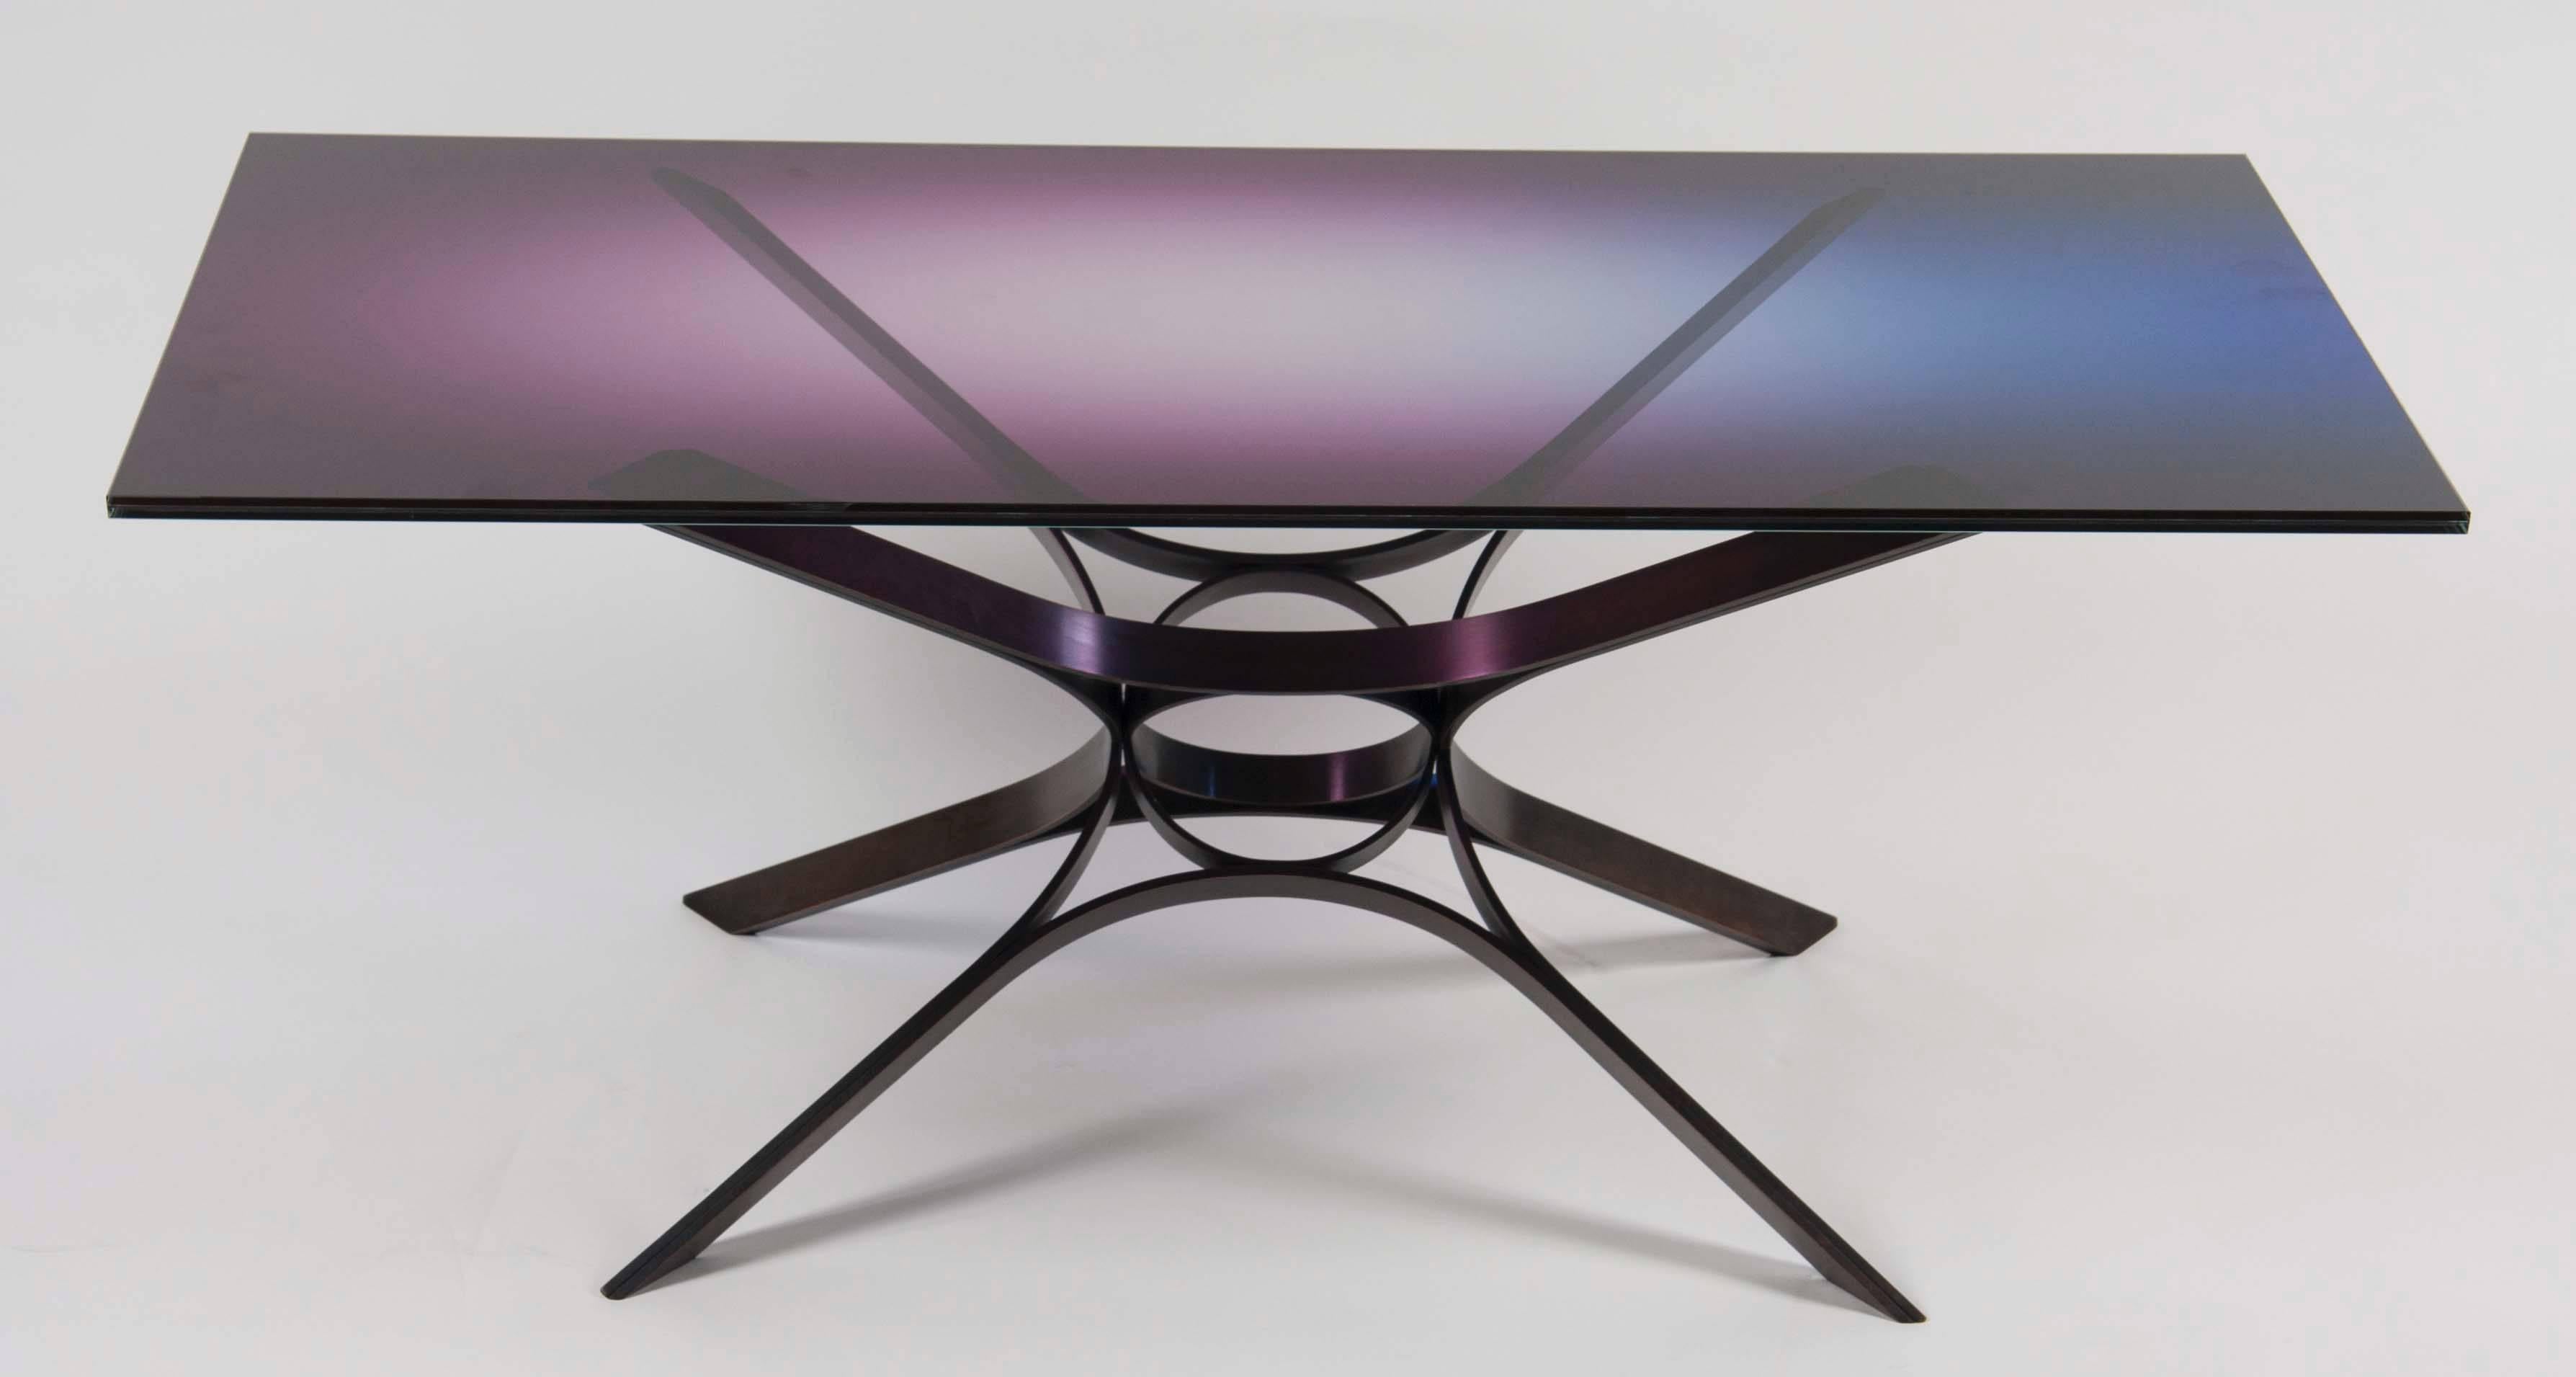 A glass top coffee table by Roger Sprunger for Dunbar with a multi color contemporary glass top.